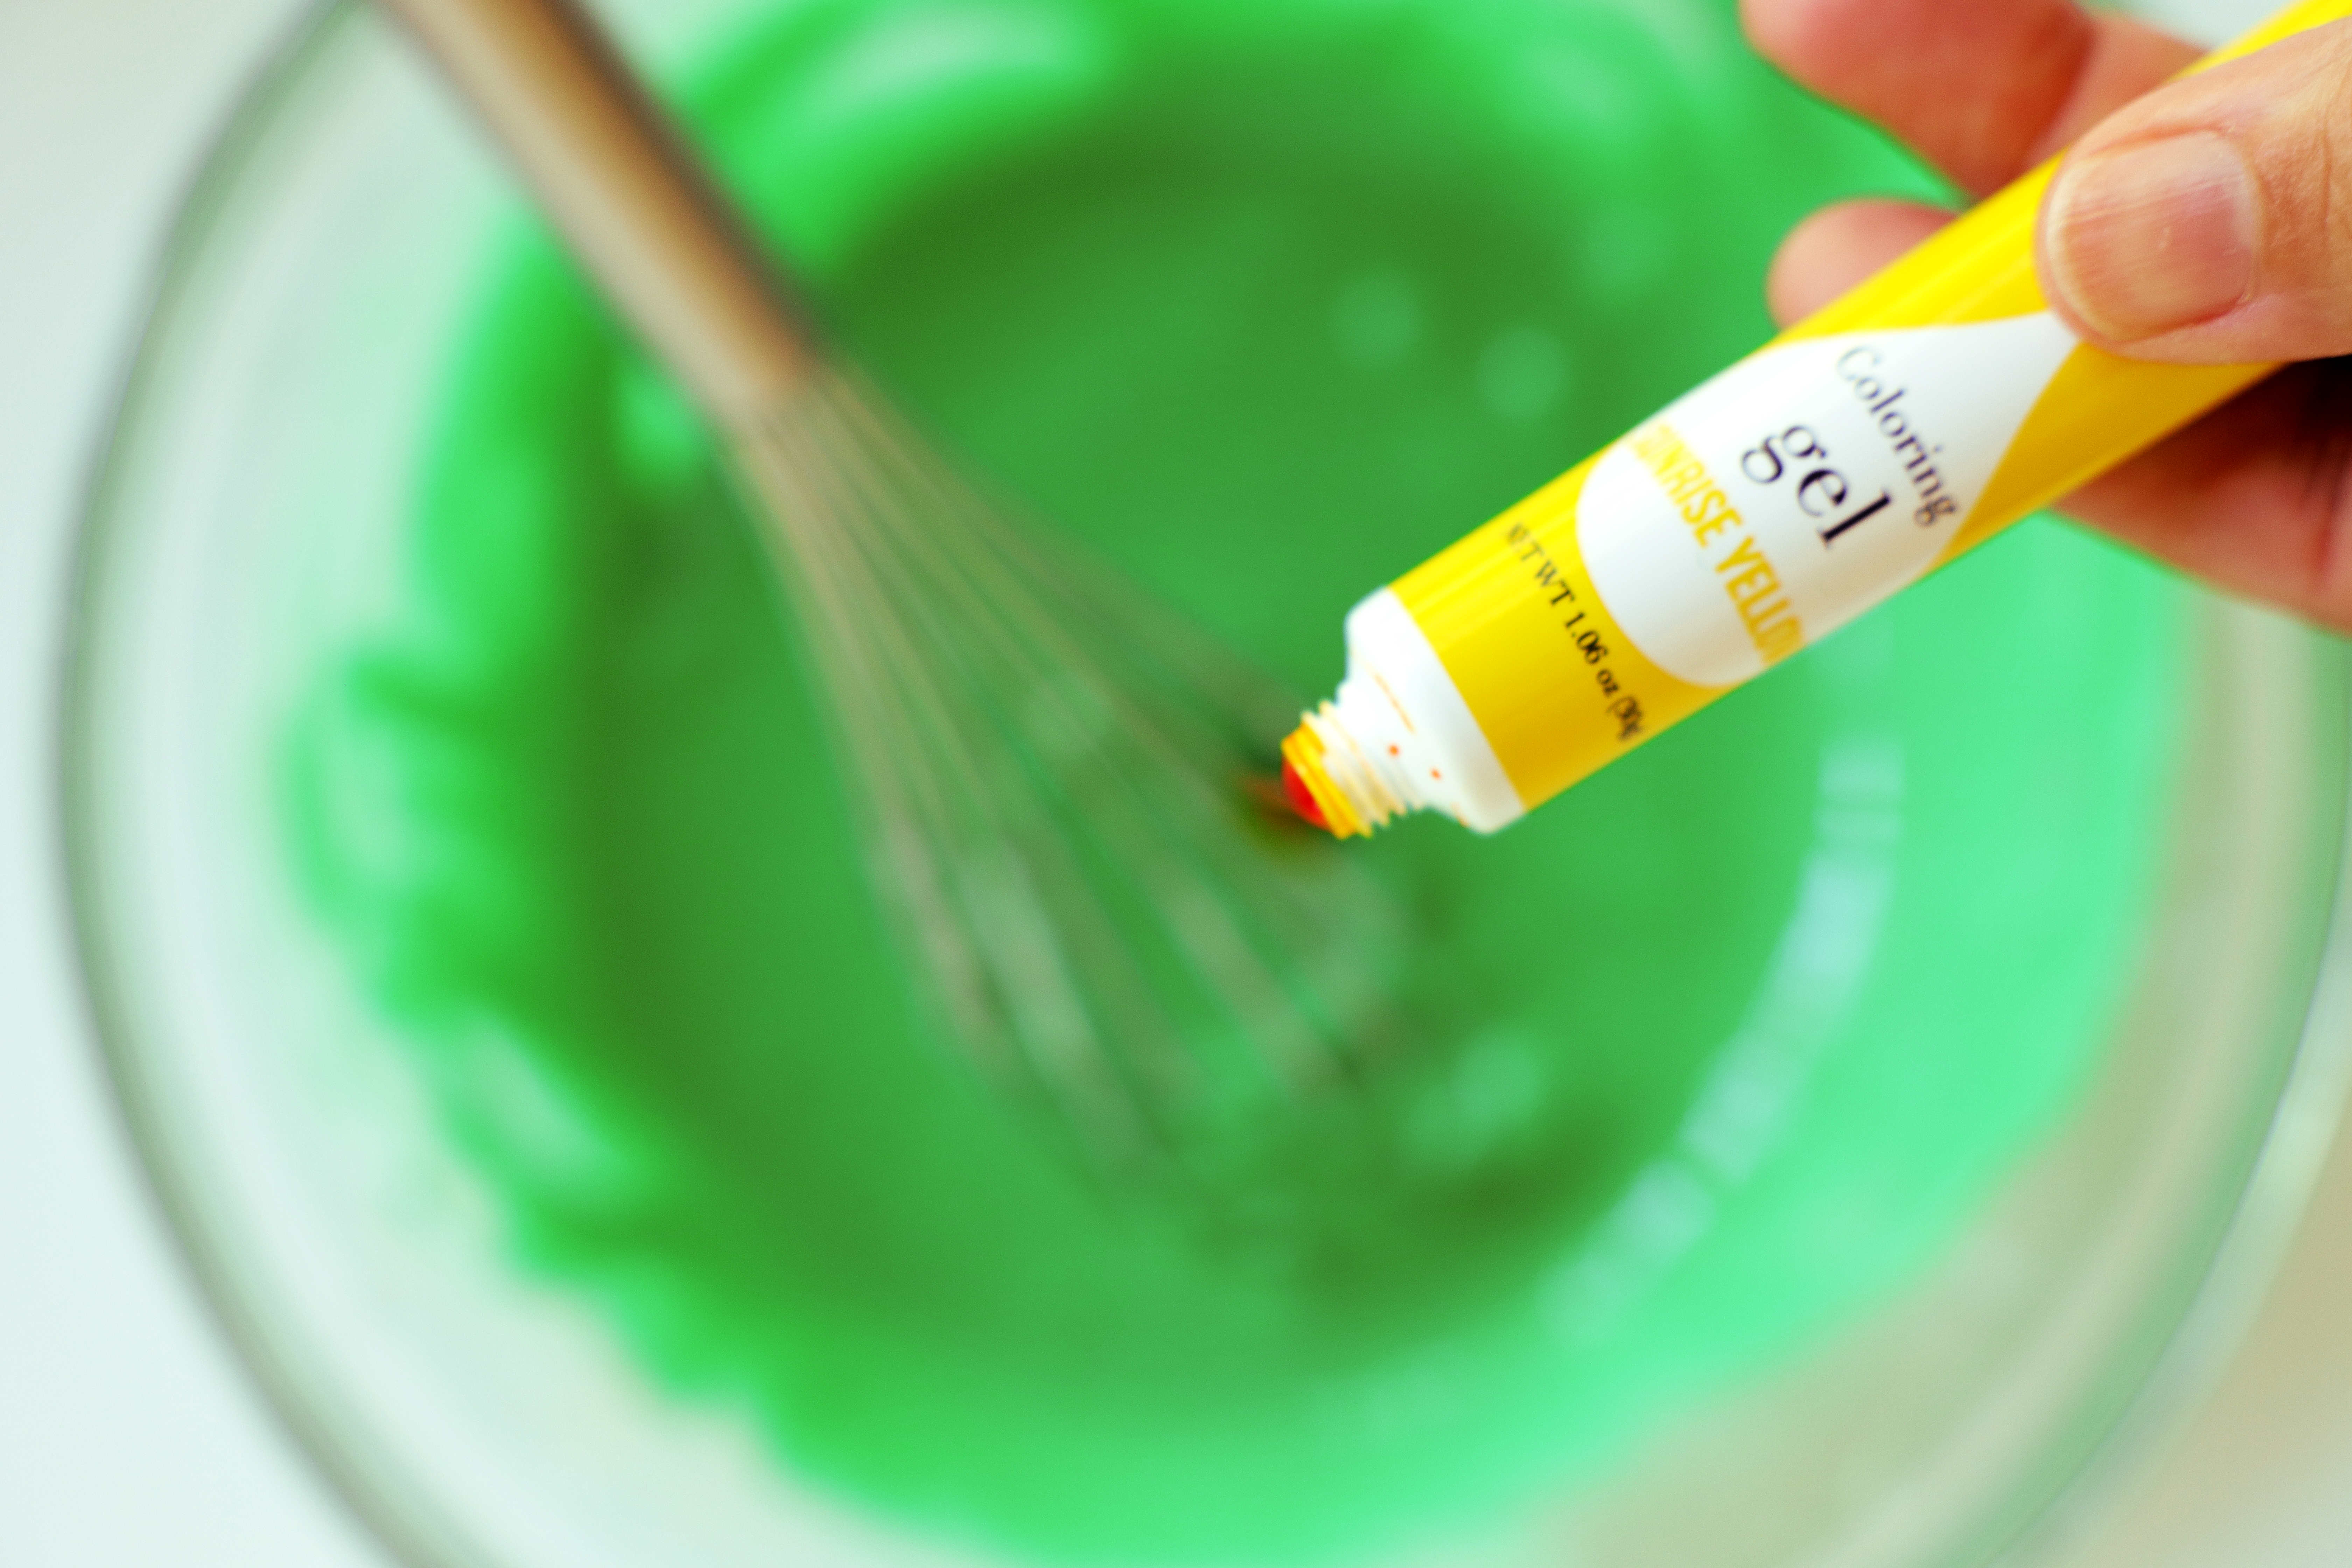 Large, clear mixing bowl containing green icing and a silver whisk. Yellow food coloring gel is being held above the bowl.